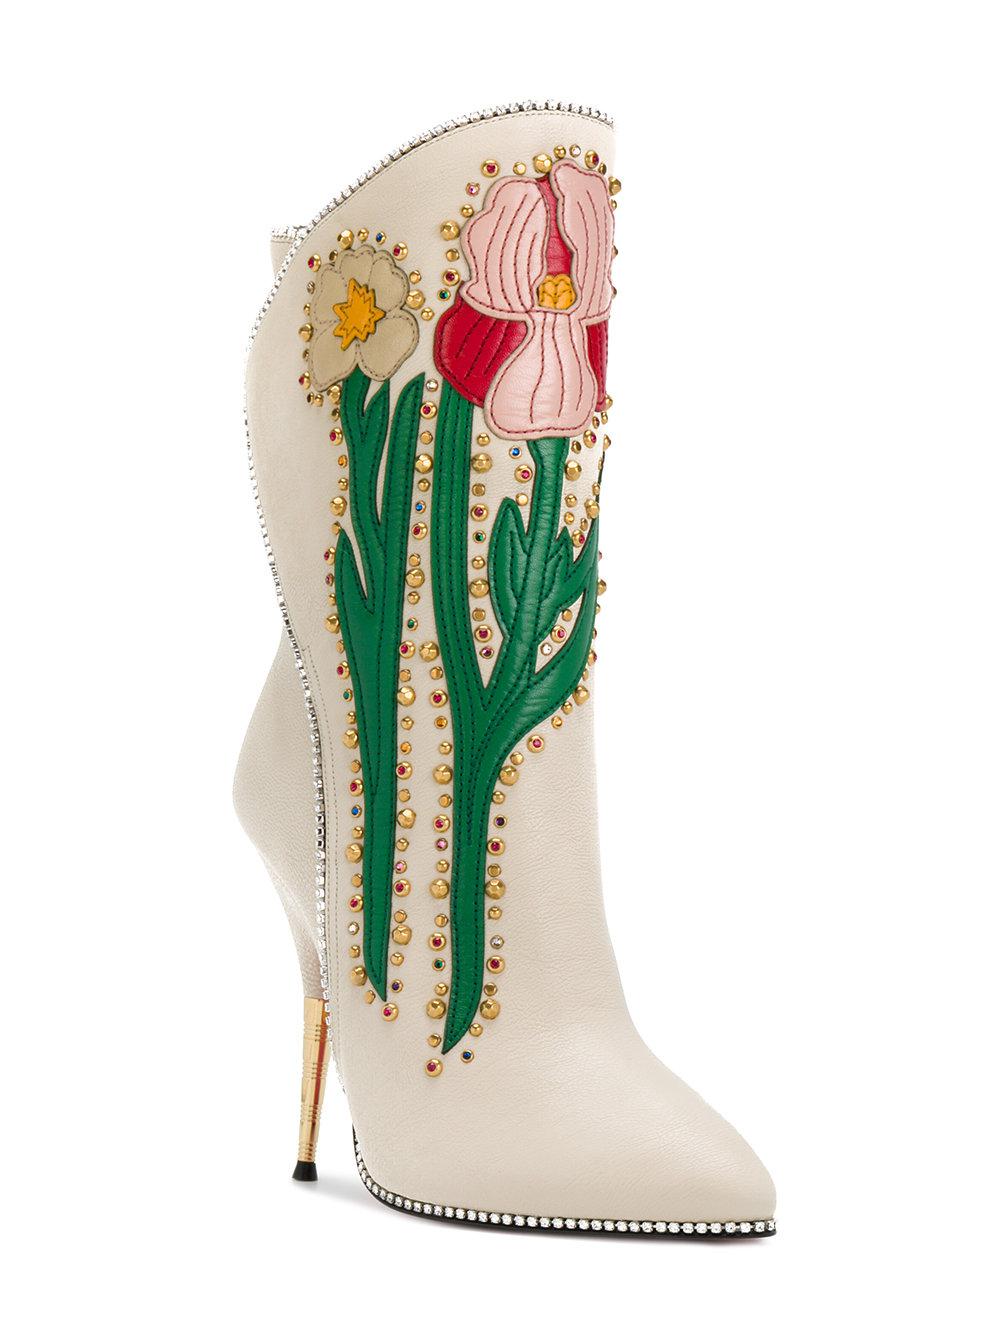 Gucci Leather Flower Intarsia Boots in 